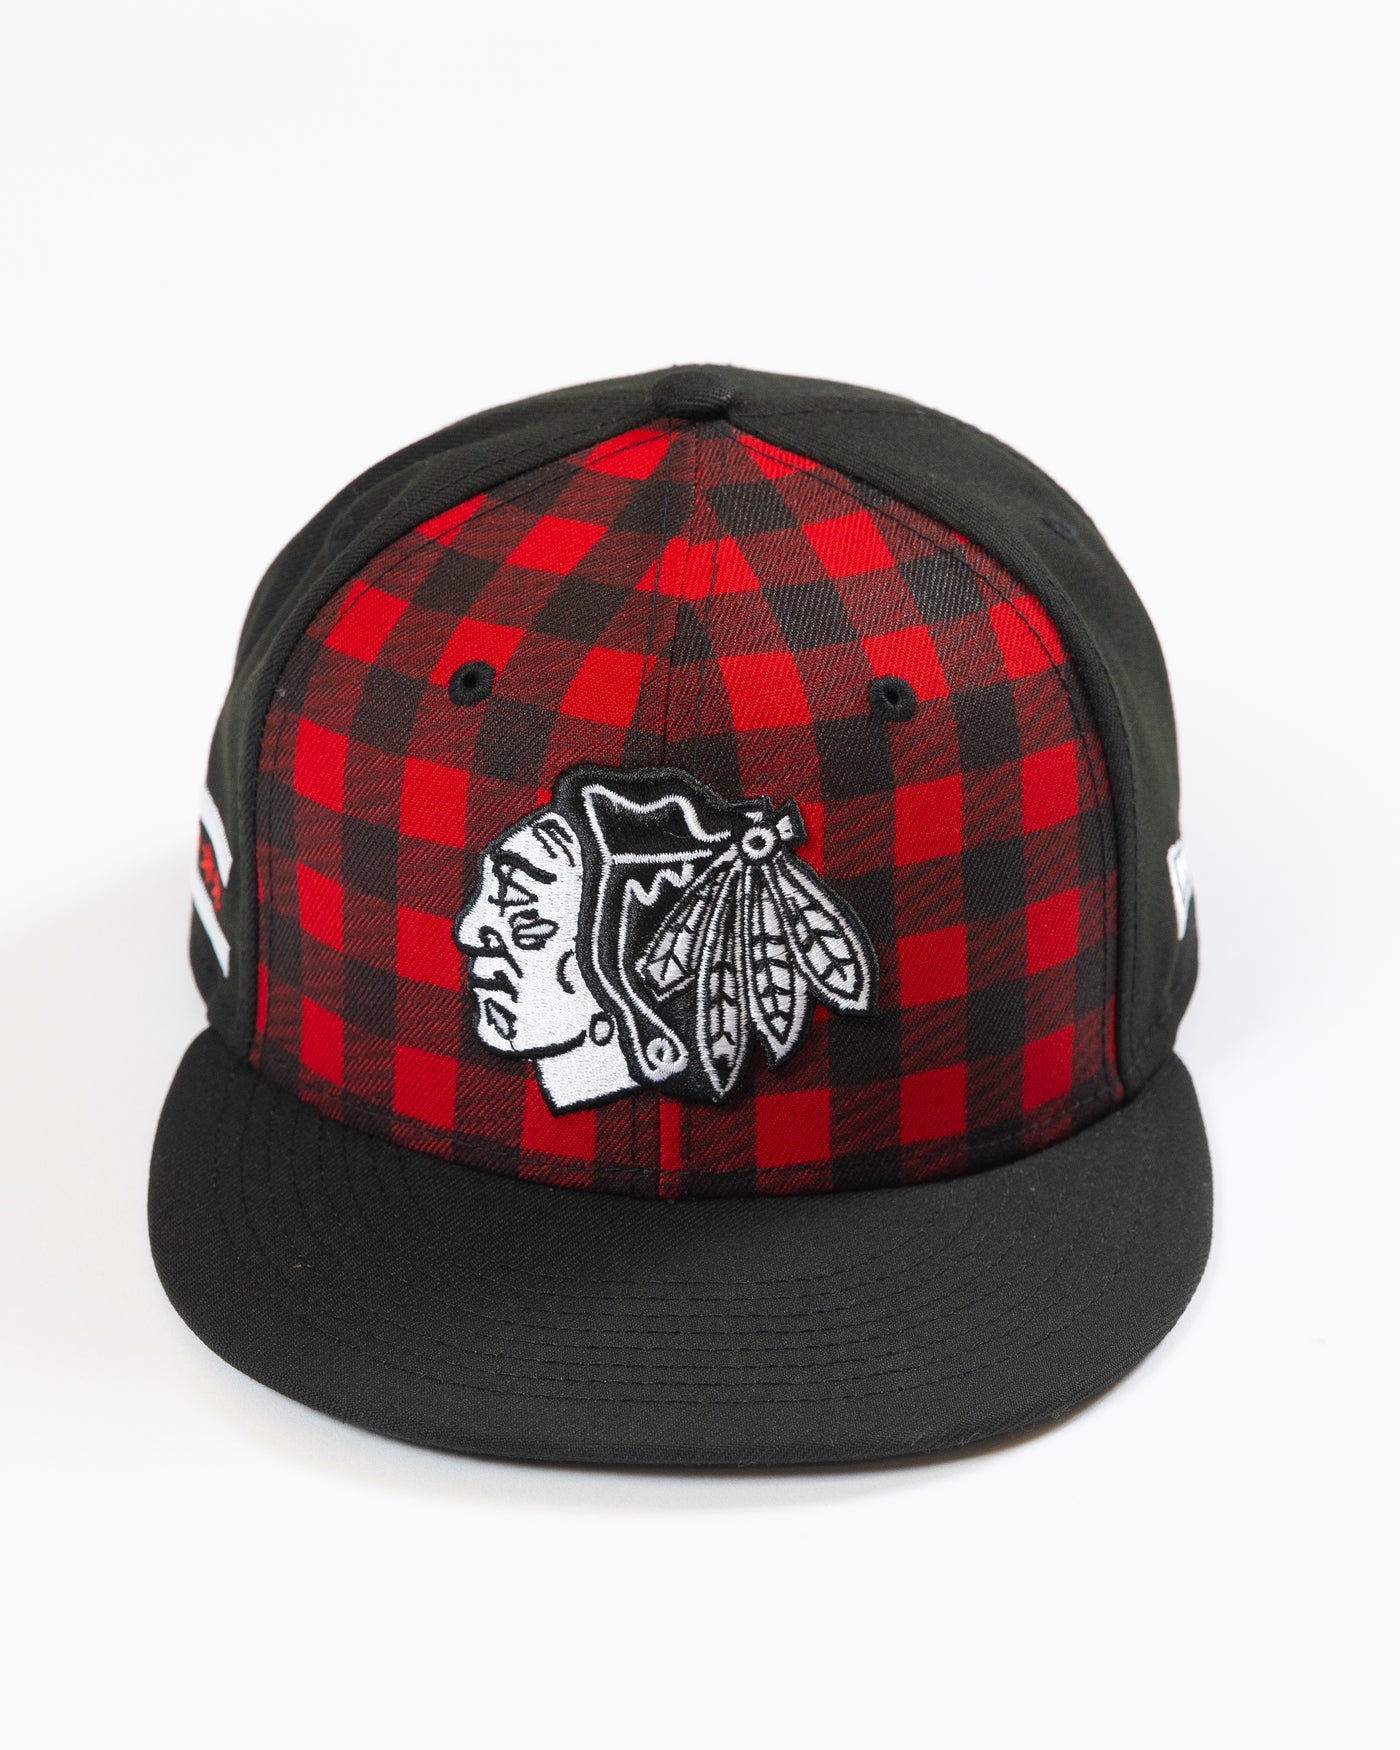 New Era red and black check snapback with tonal primary logo across front - lay flat front image